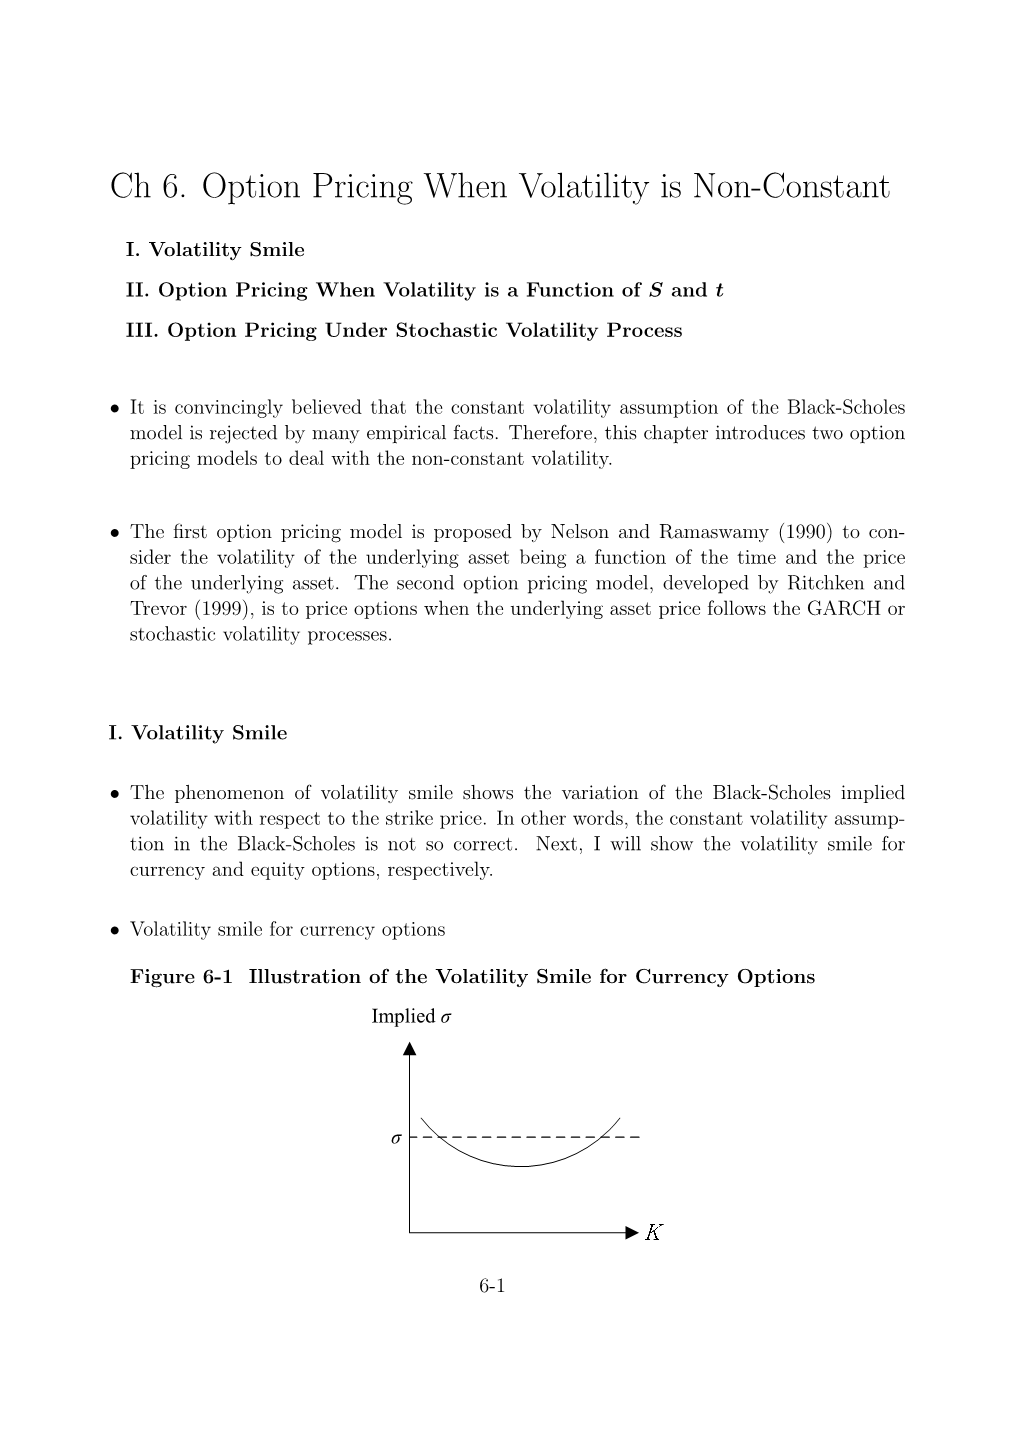 Ch 6. Option Pricing When Volatility Is Non-Constant